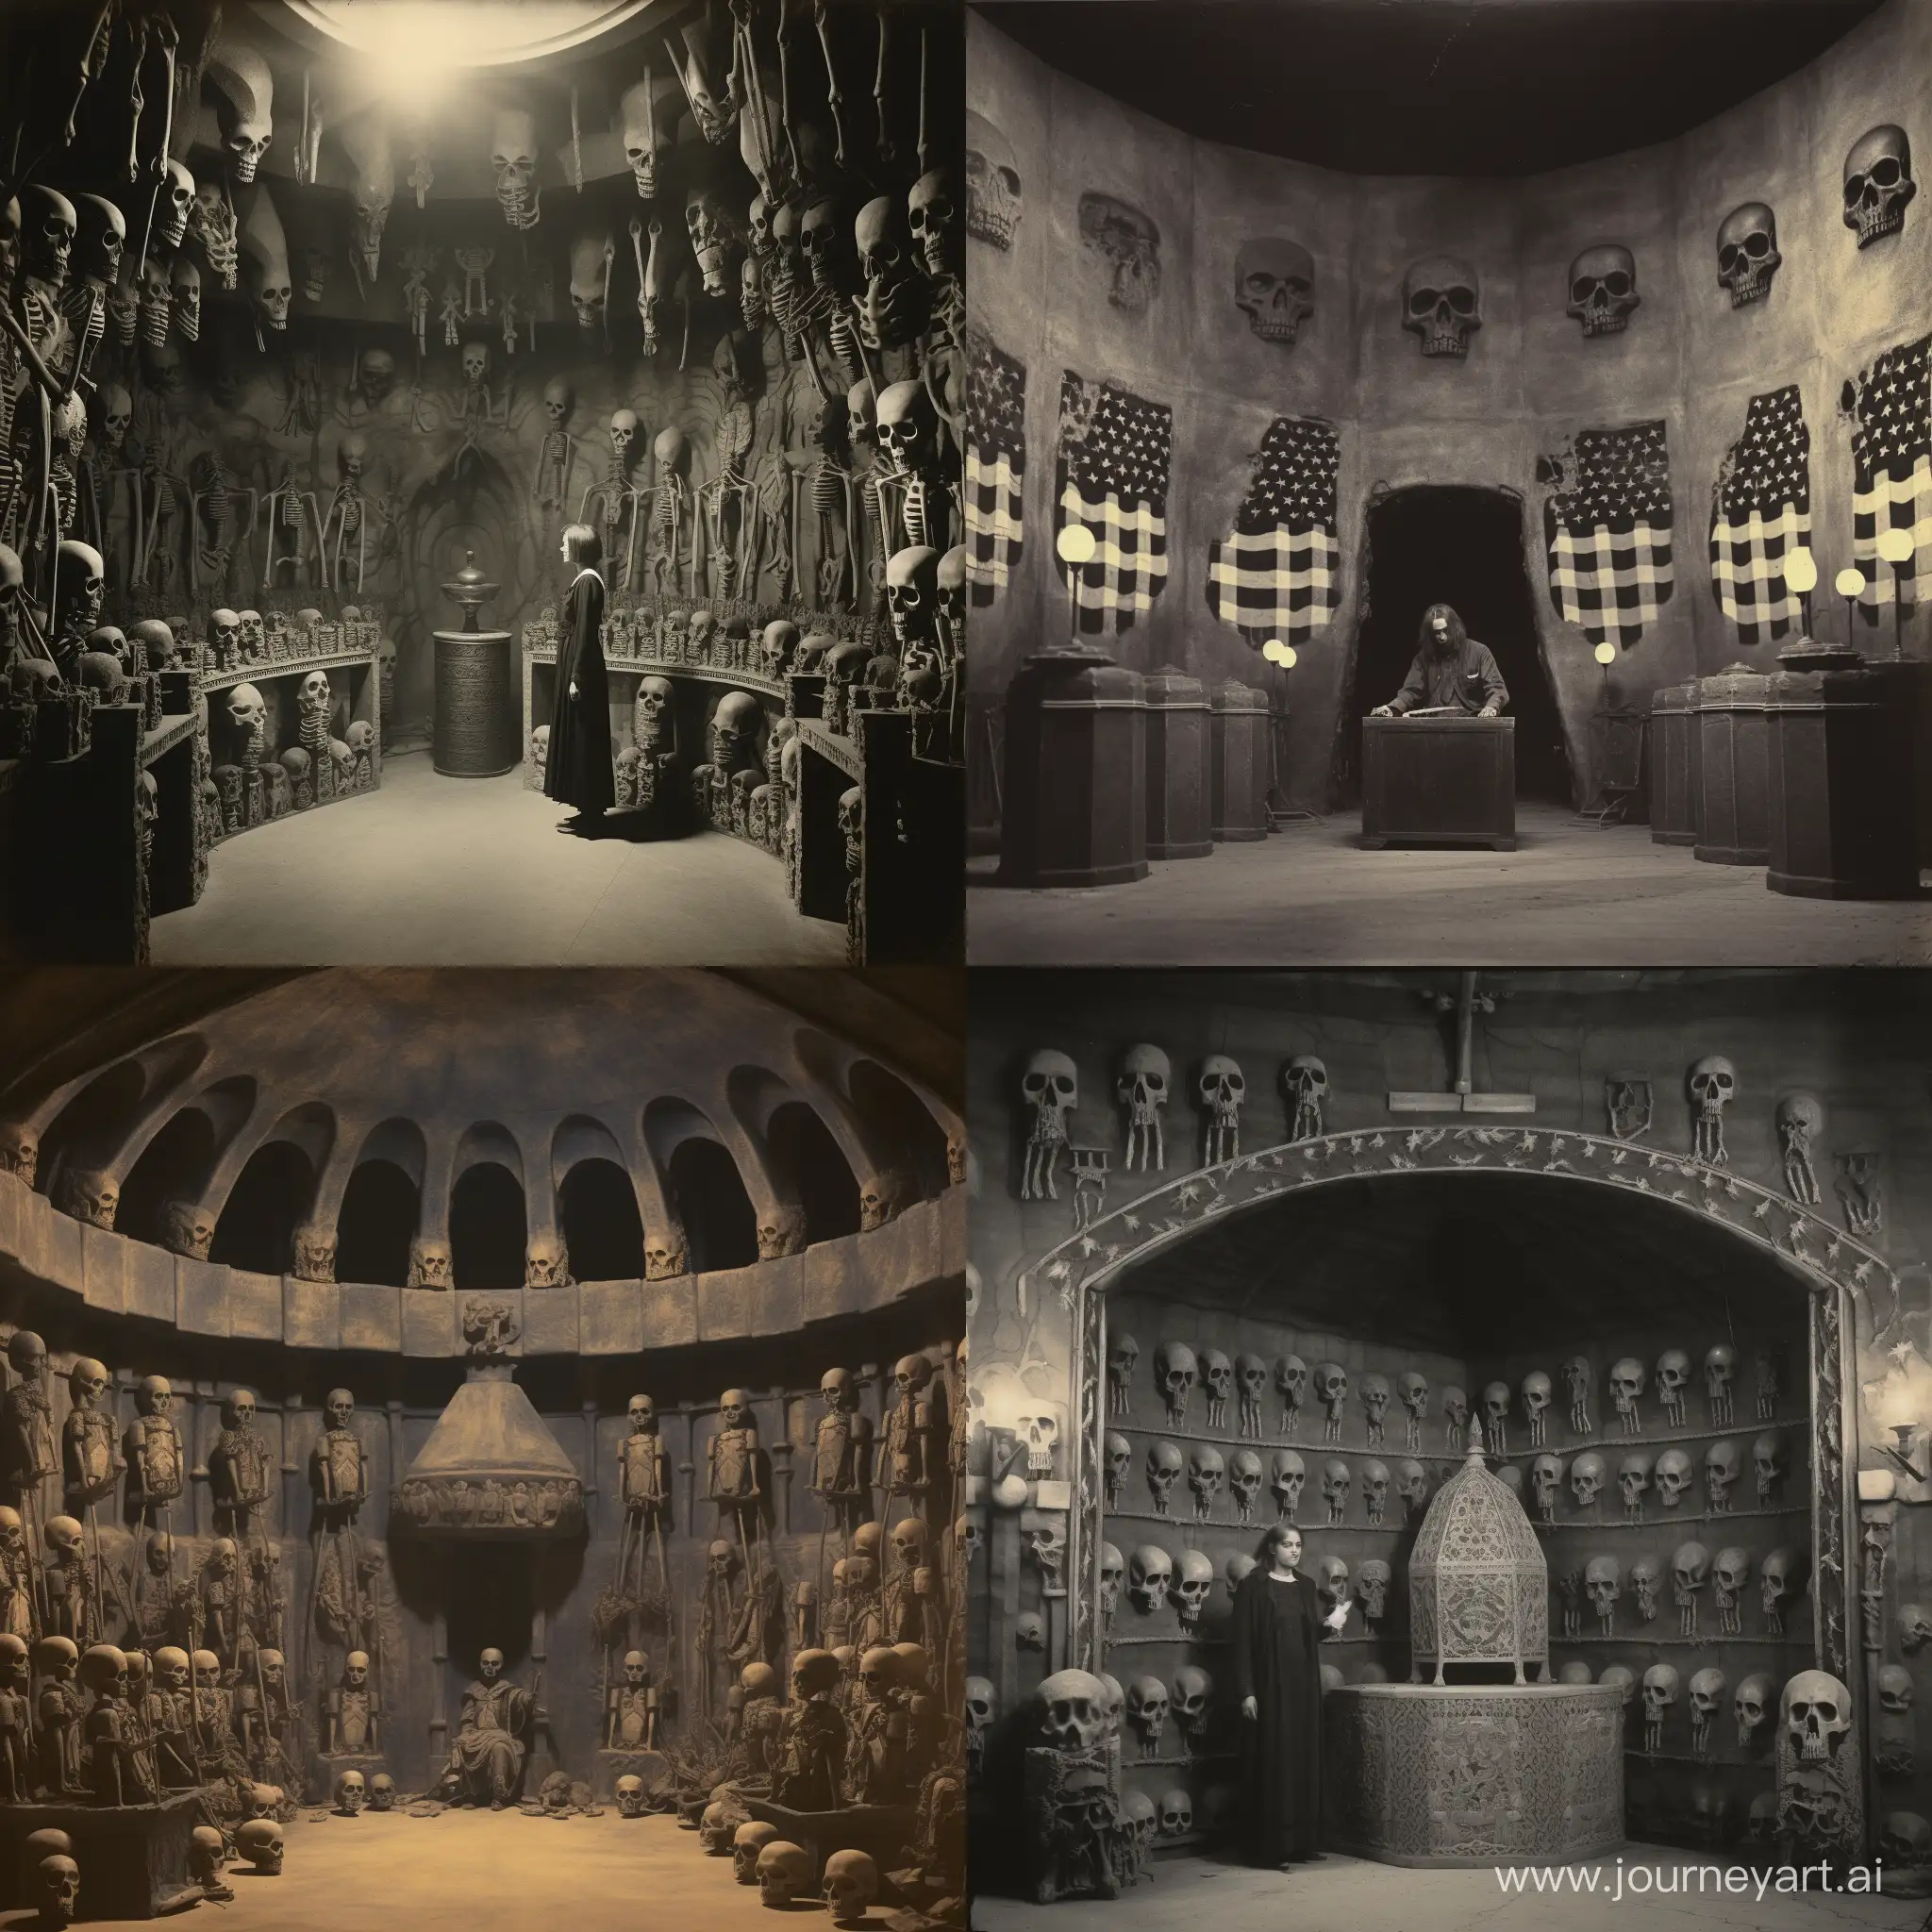 Ancient-Ritual-in-1920s-America-Crypt